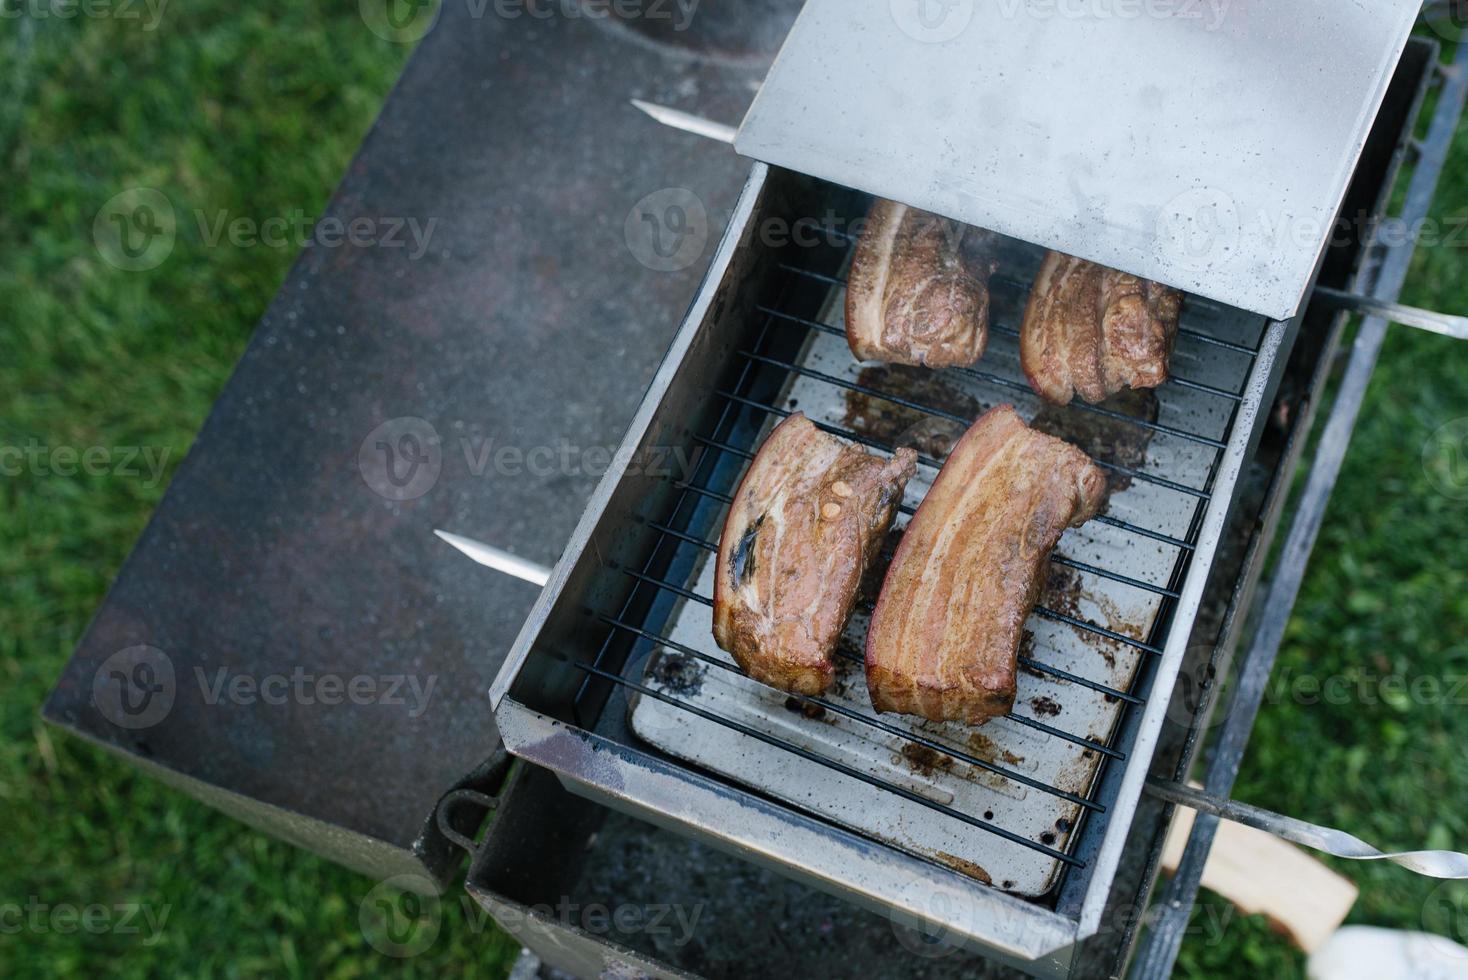 Bacon is smoked in a metal smokehouse in the open air photo